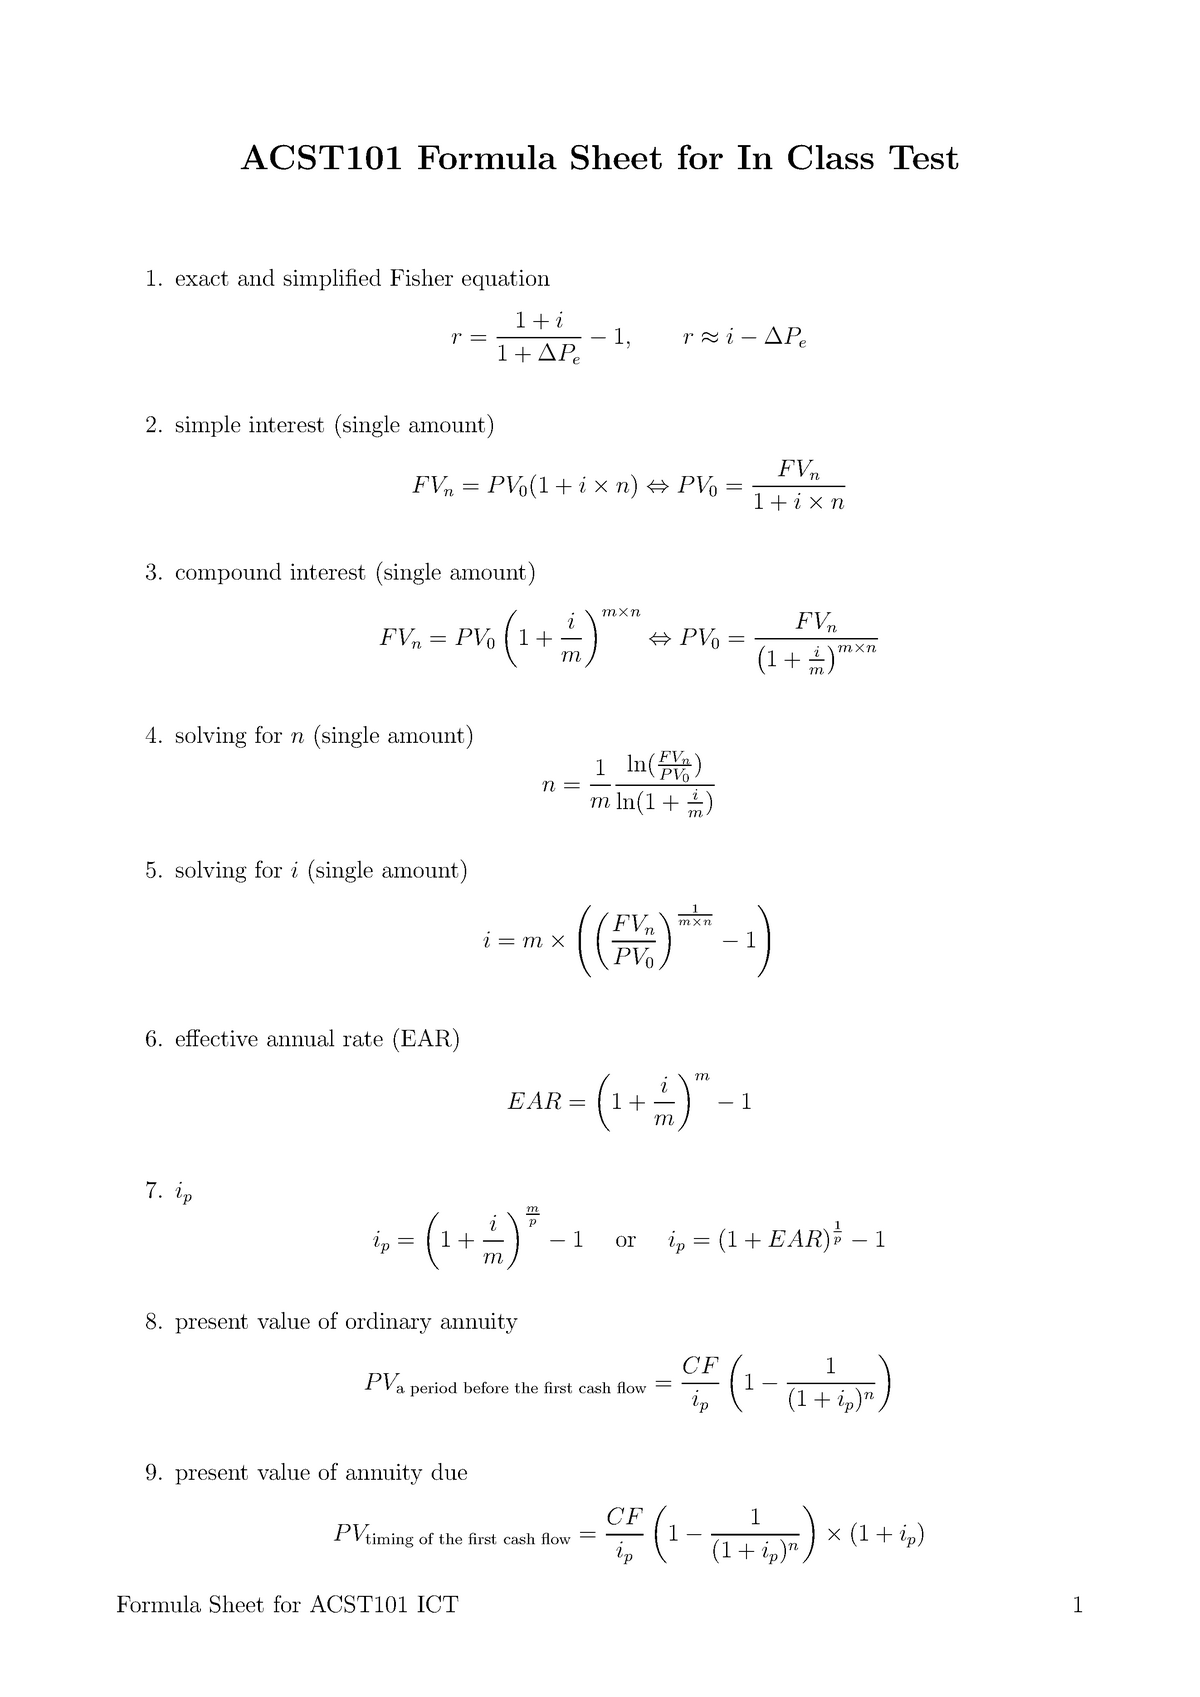 acst1001-formula-sheet-acst101-formula-sheet-for-in-class-test-exact-and-simplified-fisher